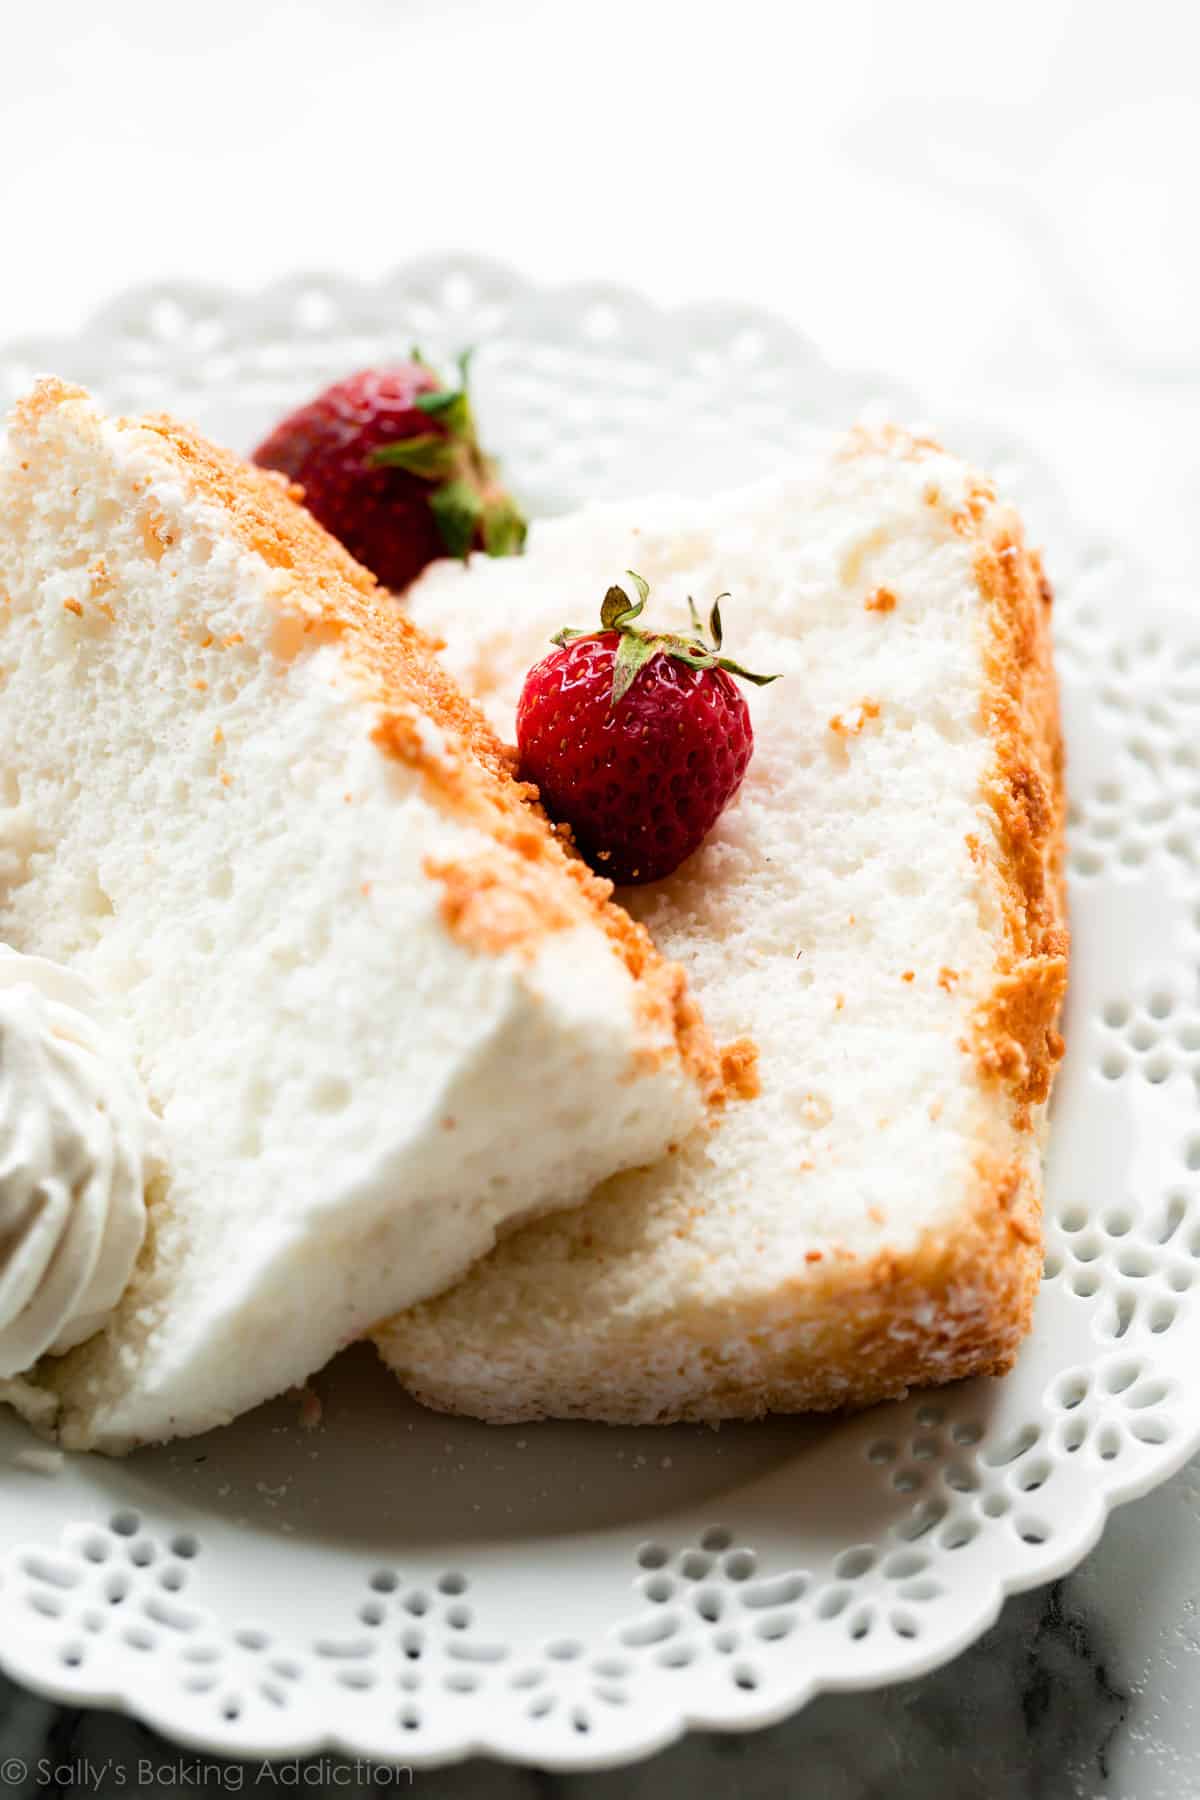 Angel food cake slices with strawberries on white plate